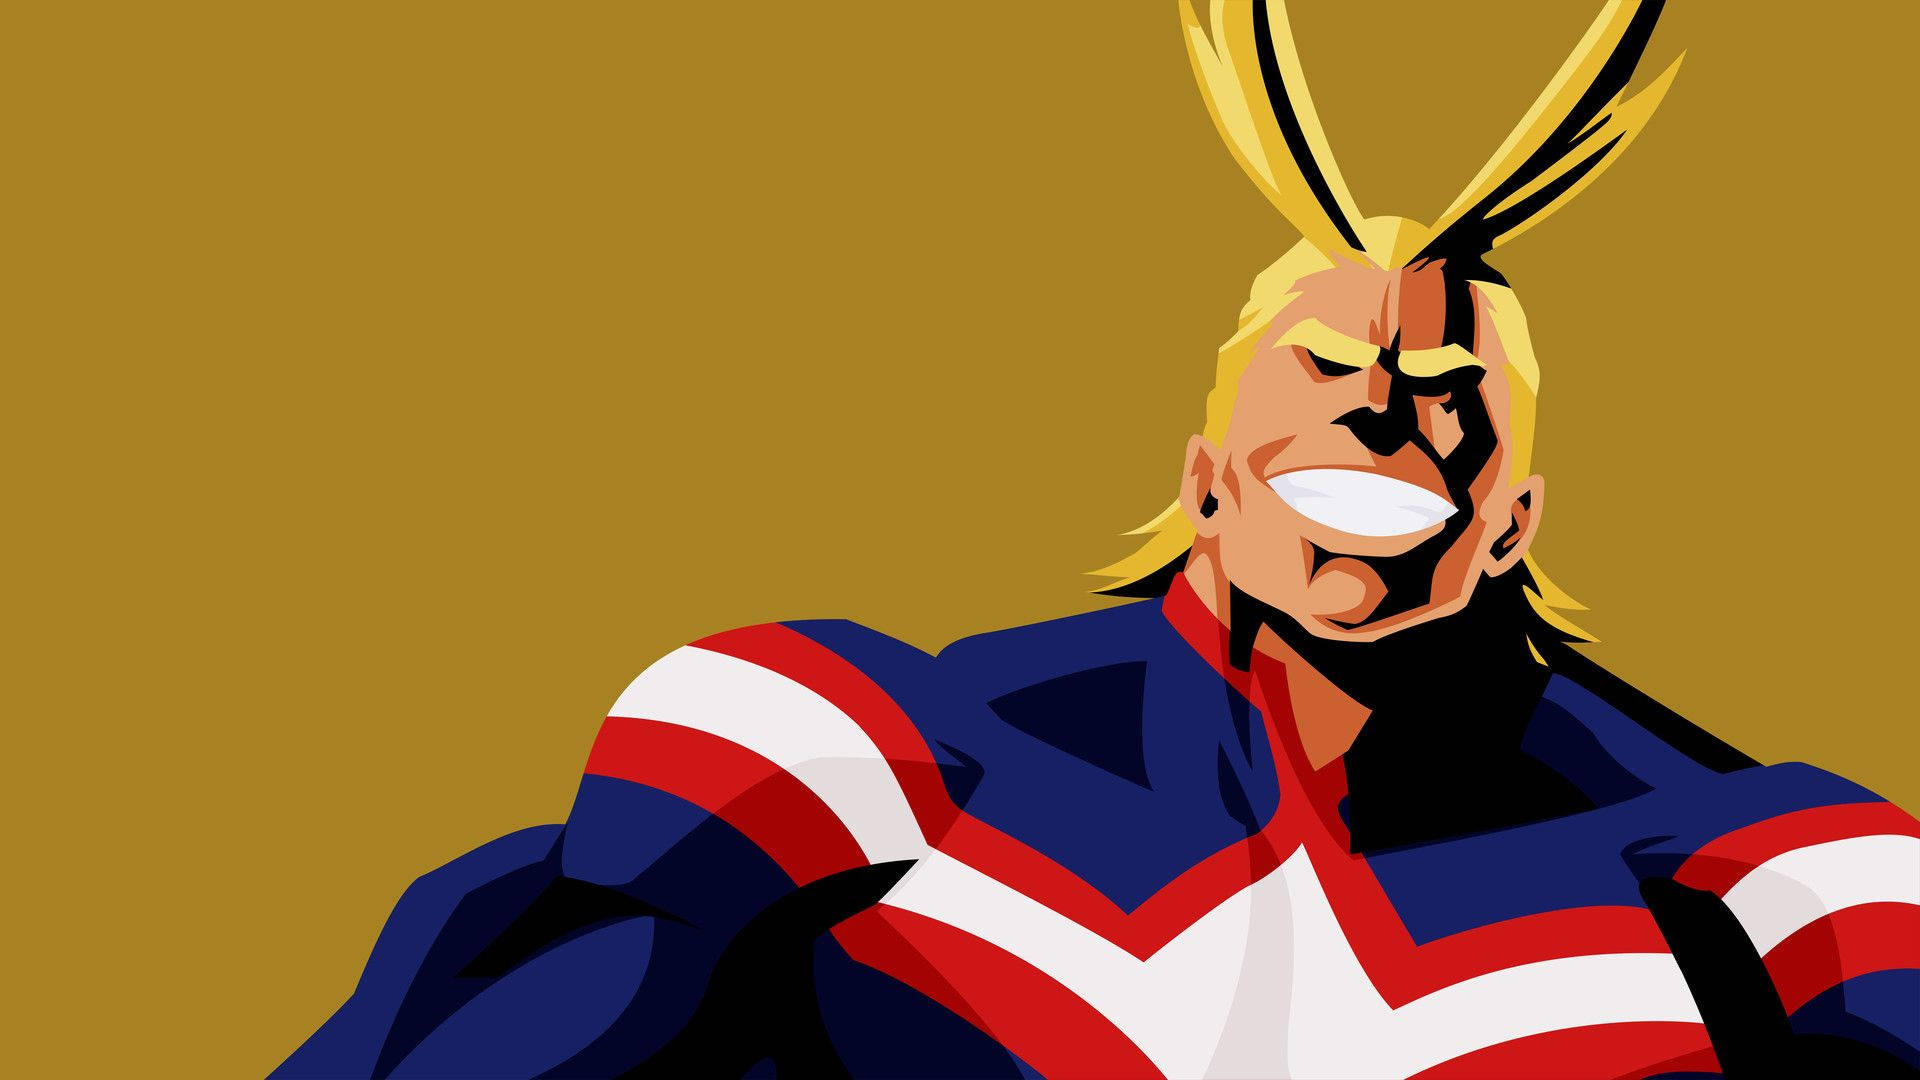 Minimalist Low Poly All Might Wallpaper